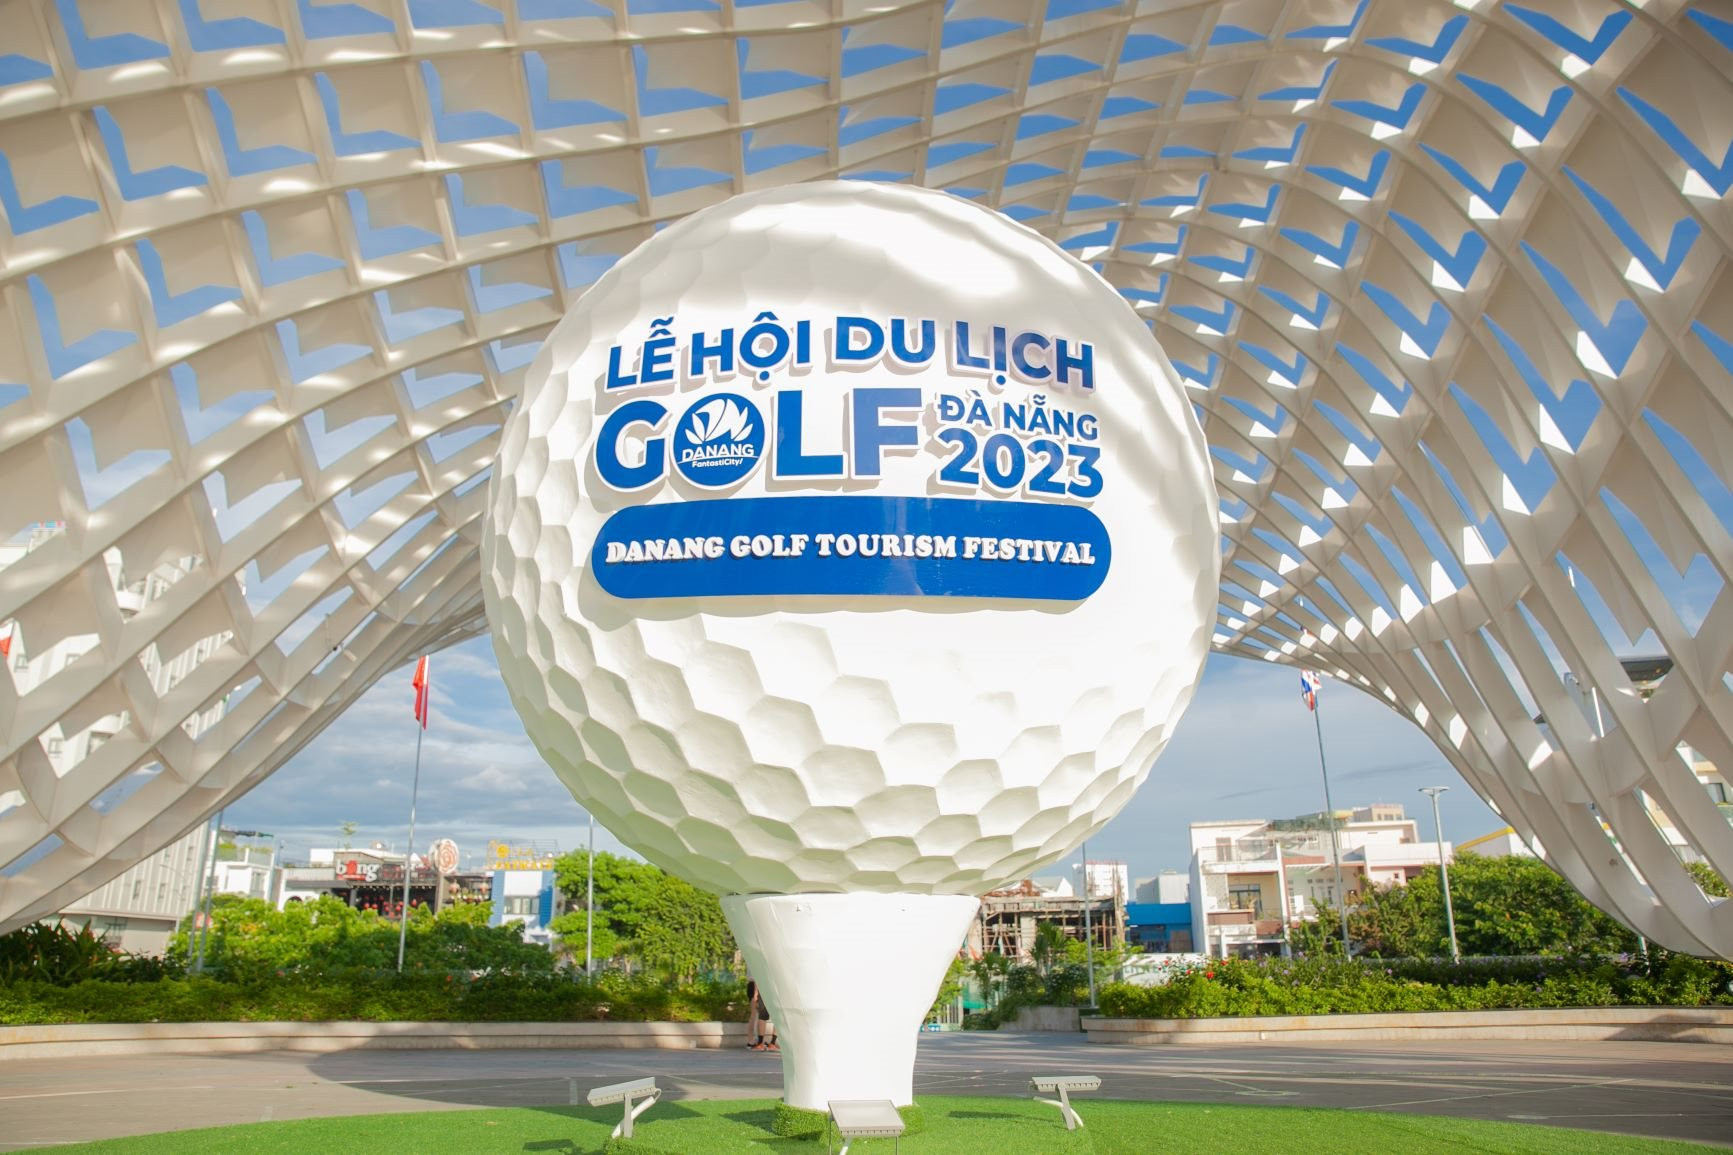 The opening of the Danang Tourism Golf Festival 2023